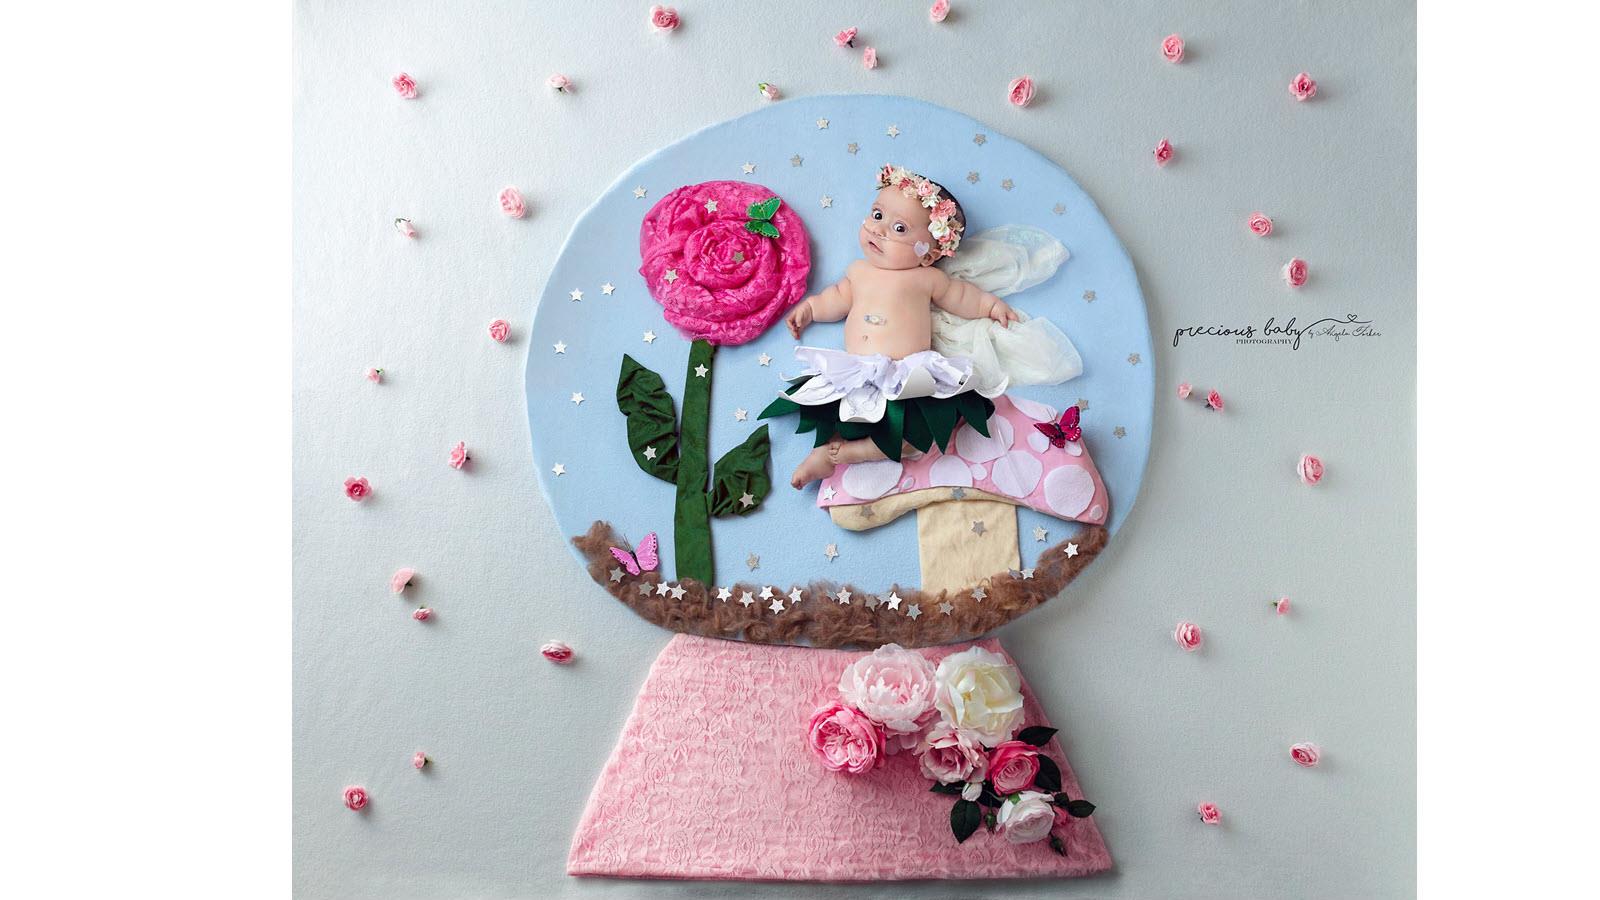 Baby dressed as a fairy wears a floral crown inside a snow globe scene